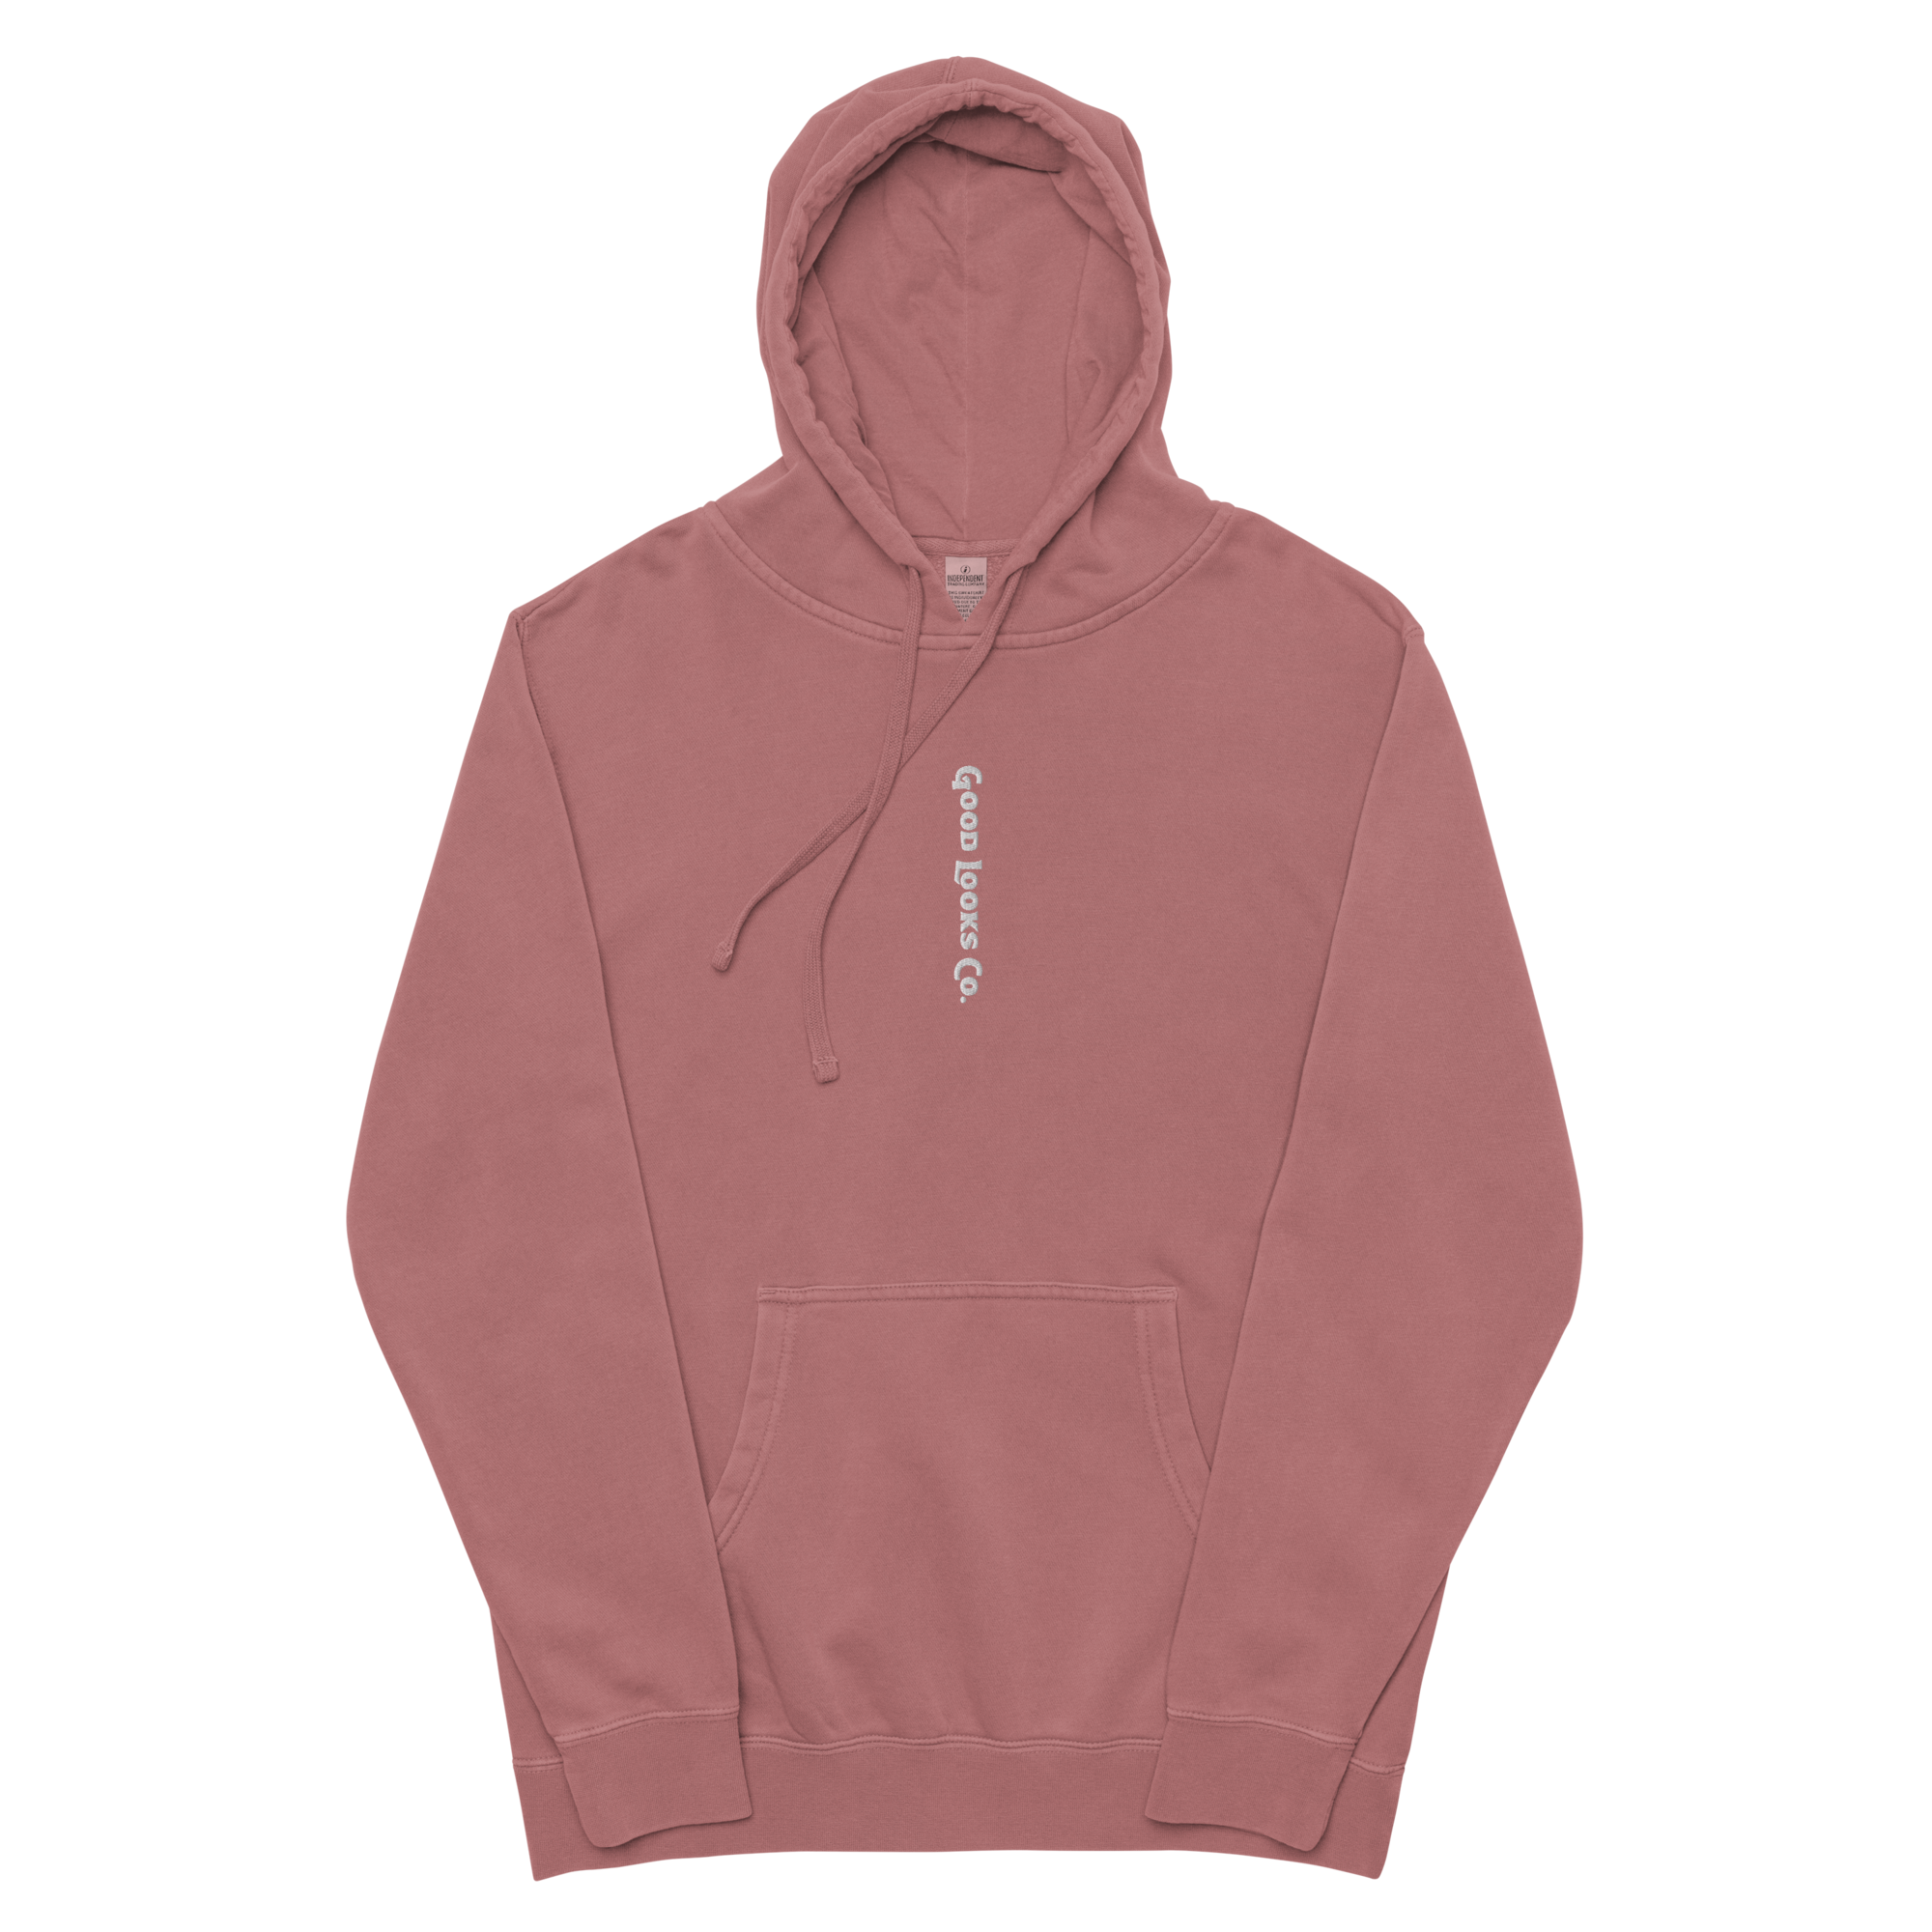 The Co. Embroidered Hoodie